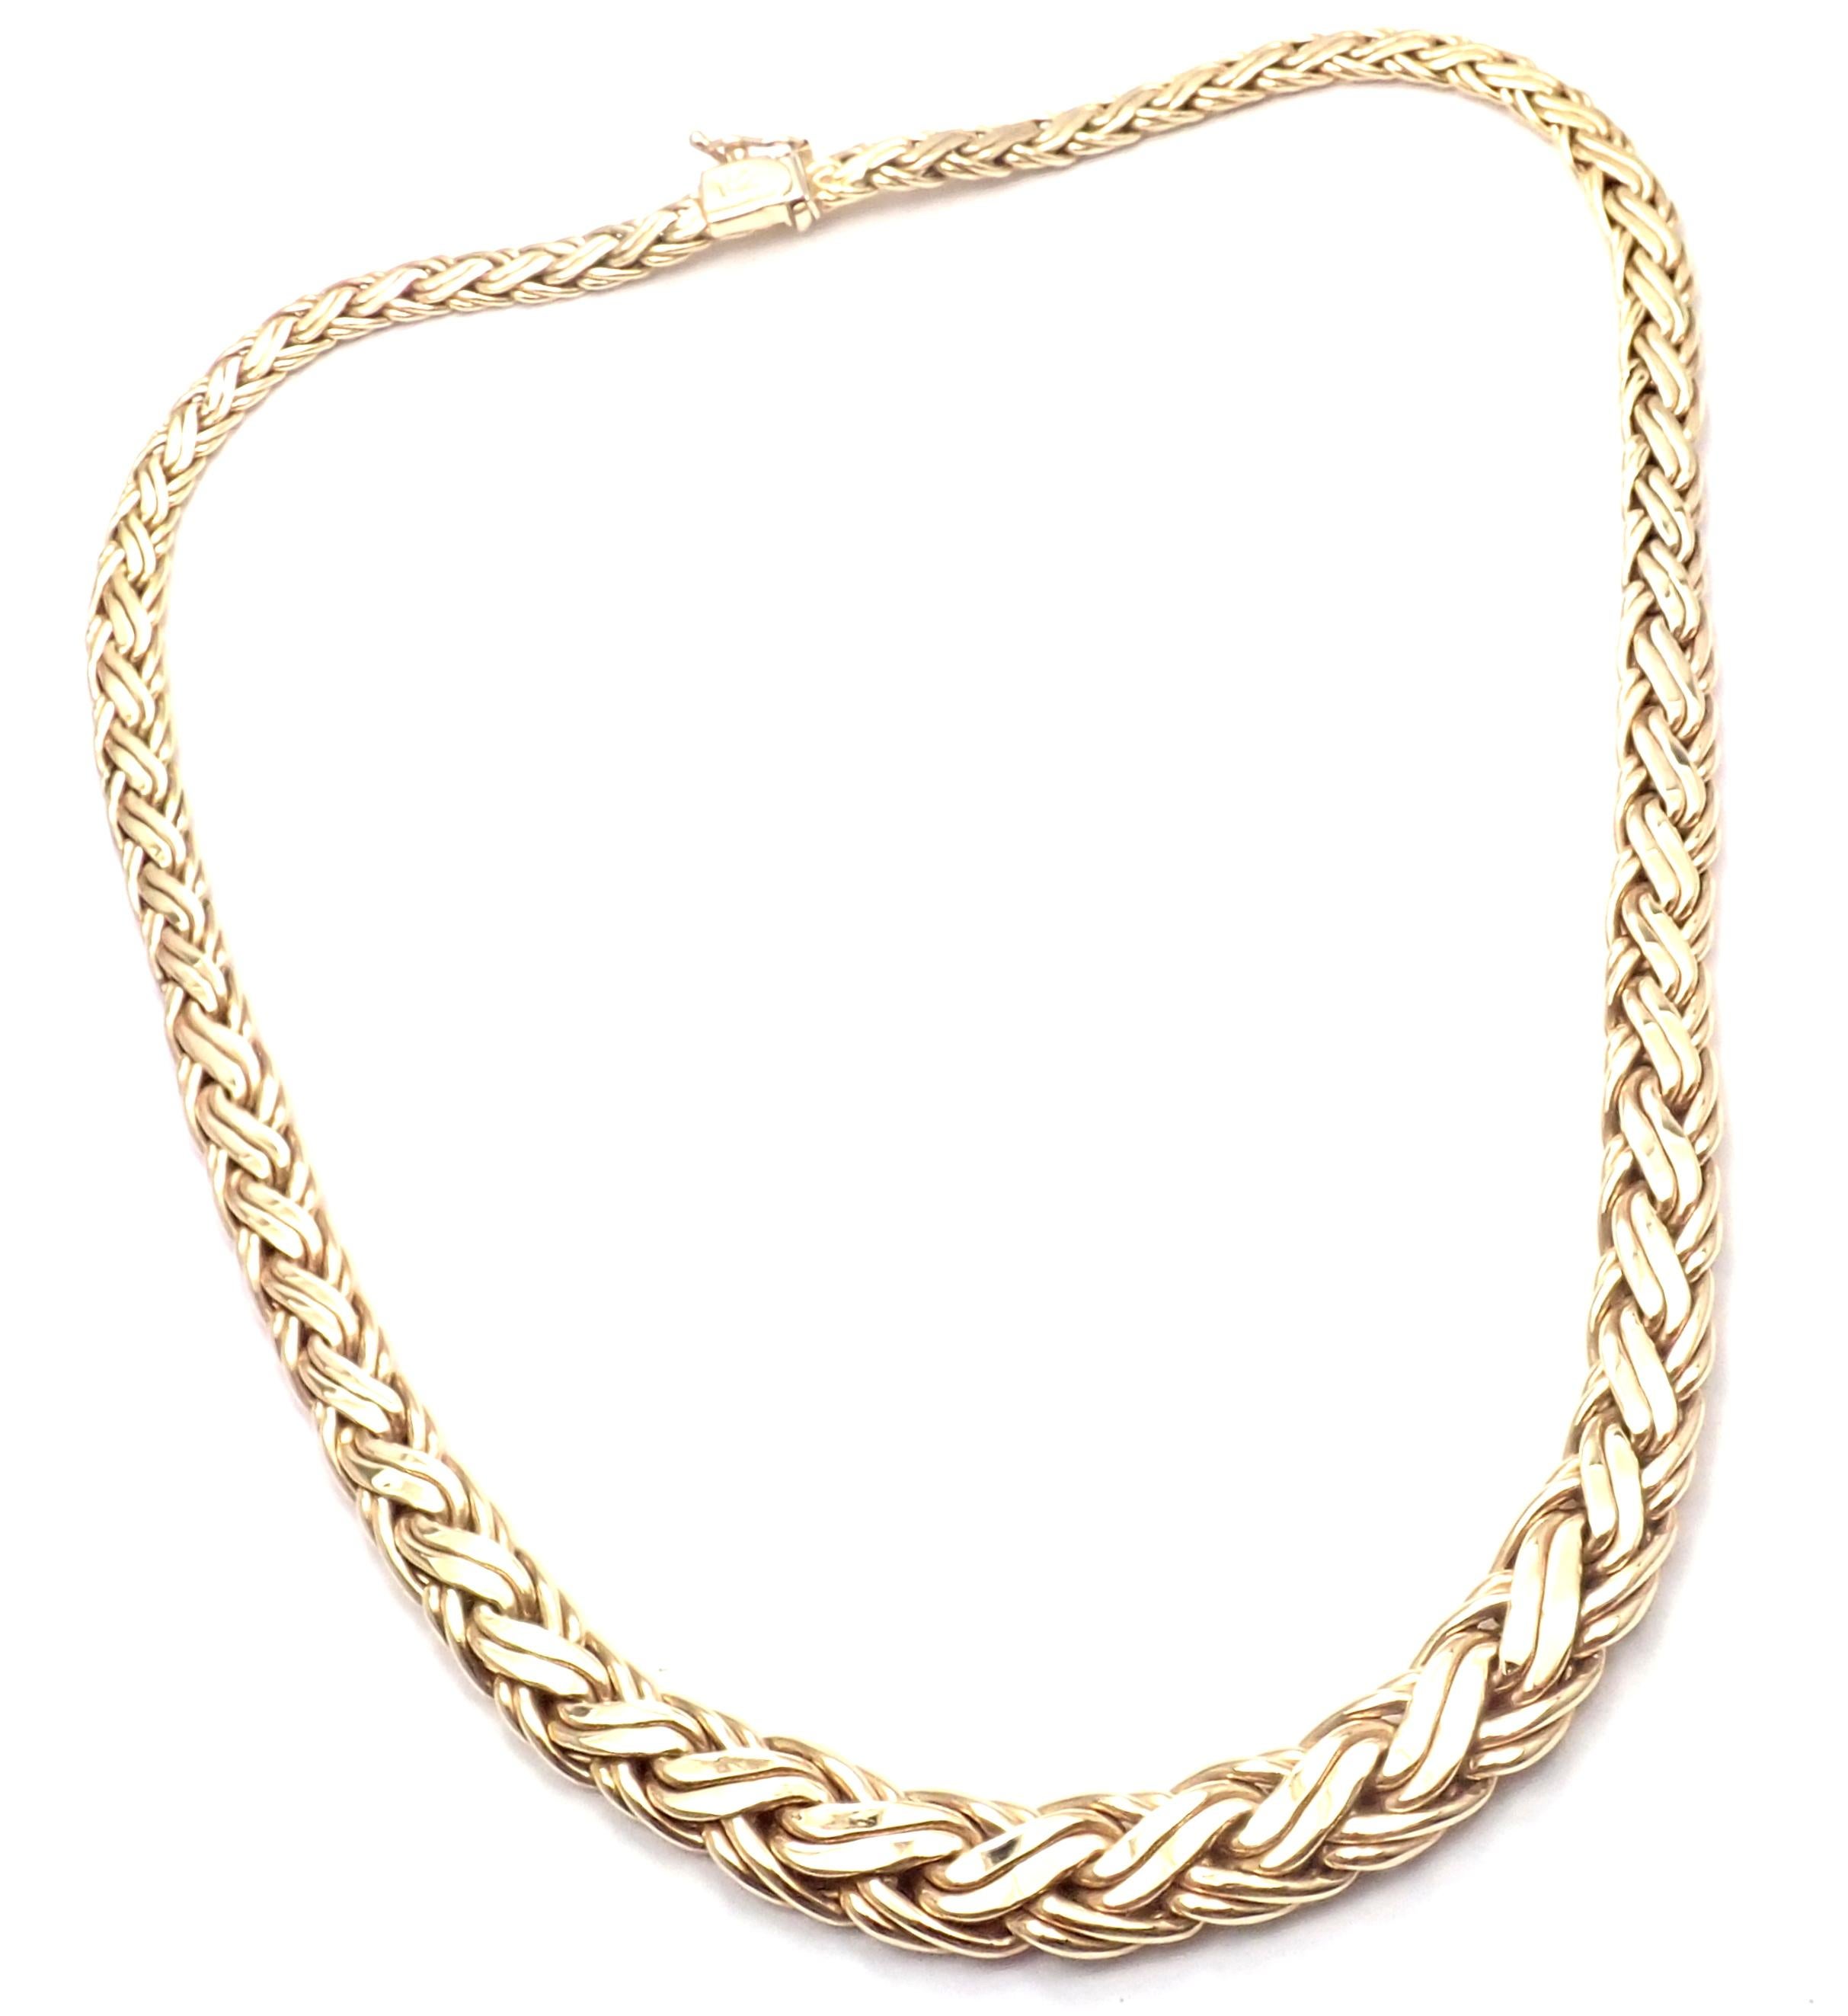 14k Yellow Gold Russian Weave Gradual Link Necklace by Tiffany & Co. 
Details: 
Length: 16